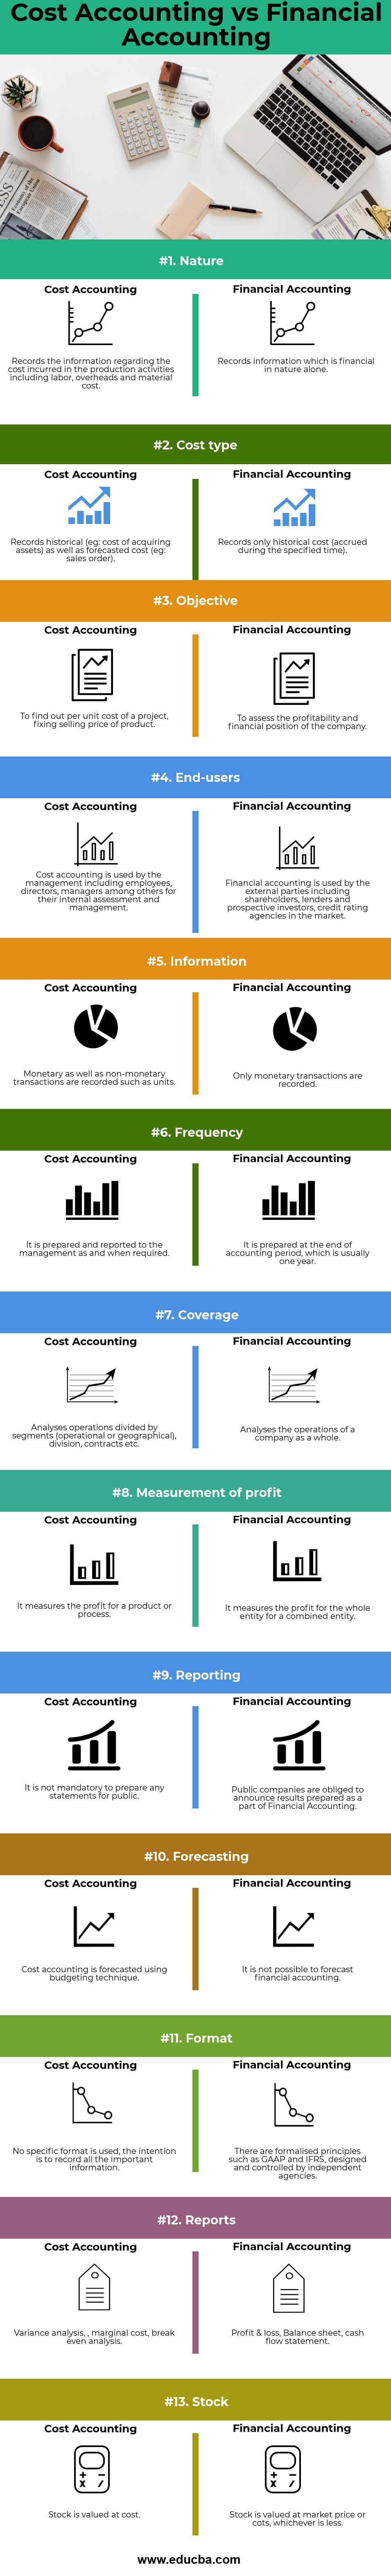 Cost Accounting vs Financial Accounting Infogrphics